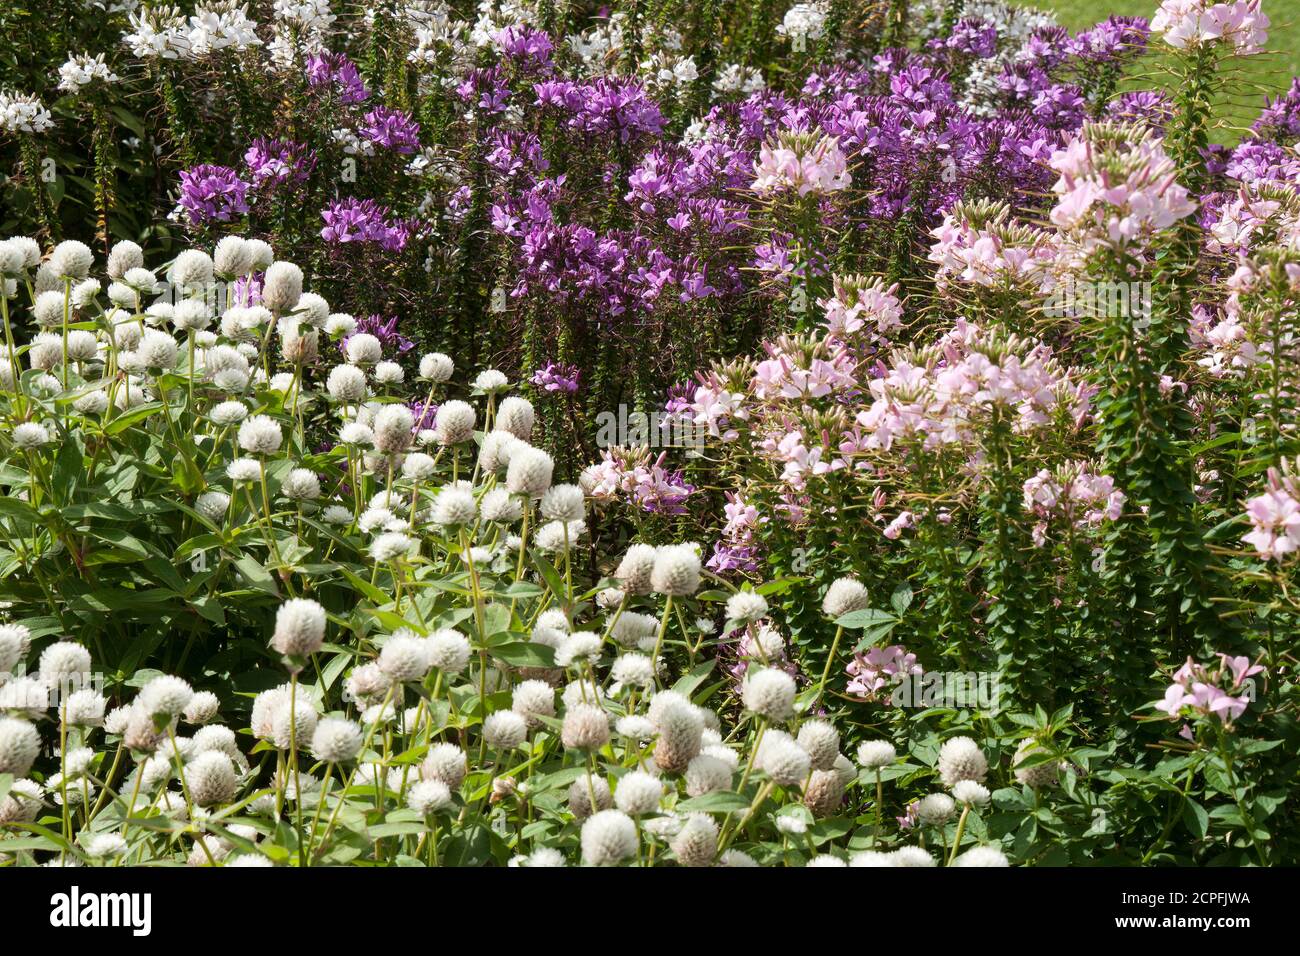 Sydney Australia, pink and purple cleome or spider flowers with white globe amaranth flowers Stock Photo